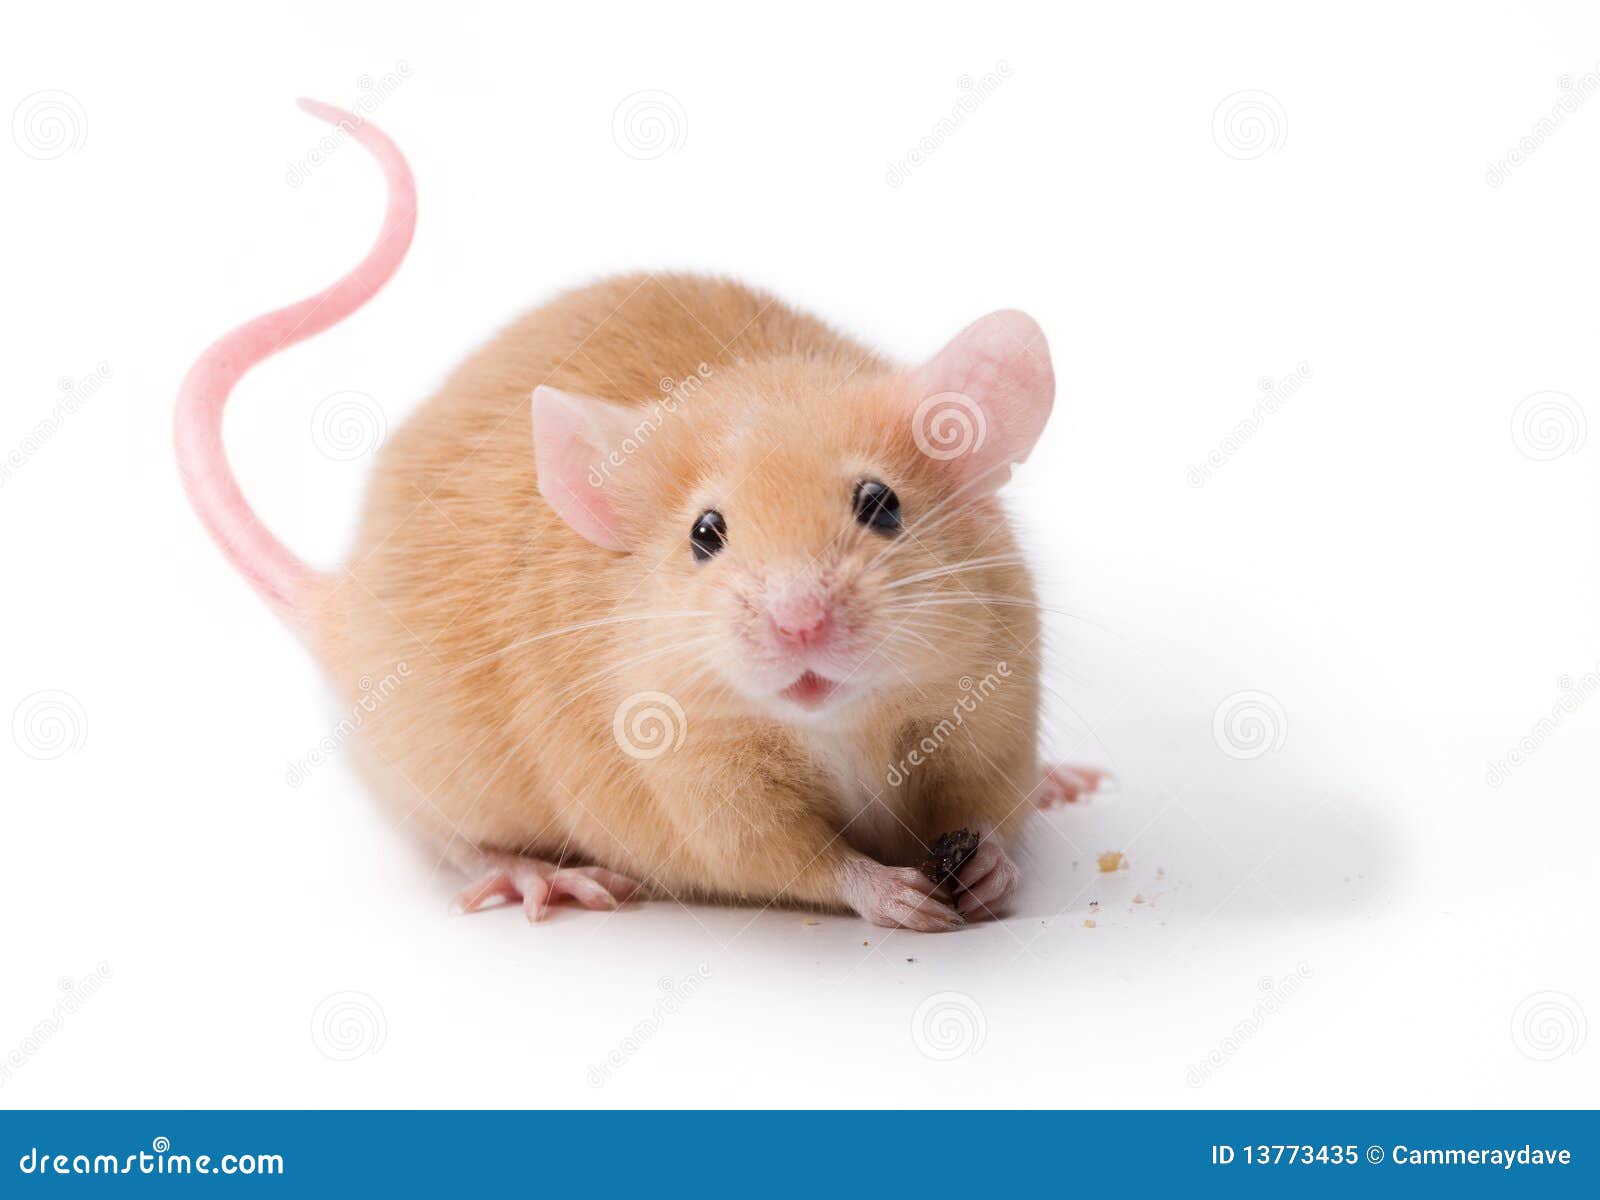 23,032 Pet Mouse Rodent Animal Stock Photos - Free & Royalty-Free Stock  Photos from Dreamstime